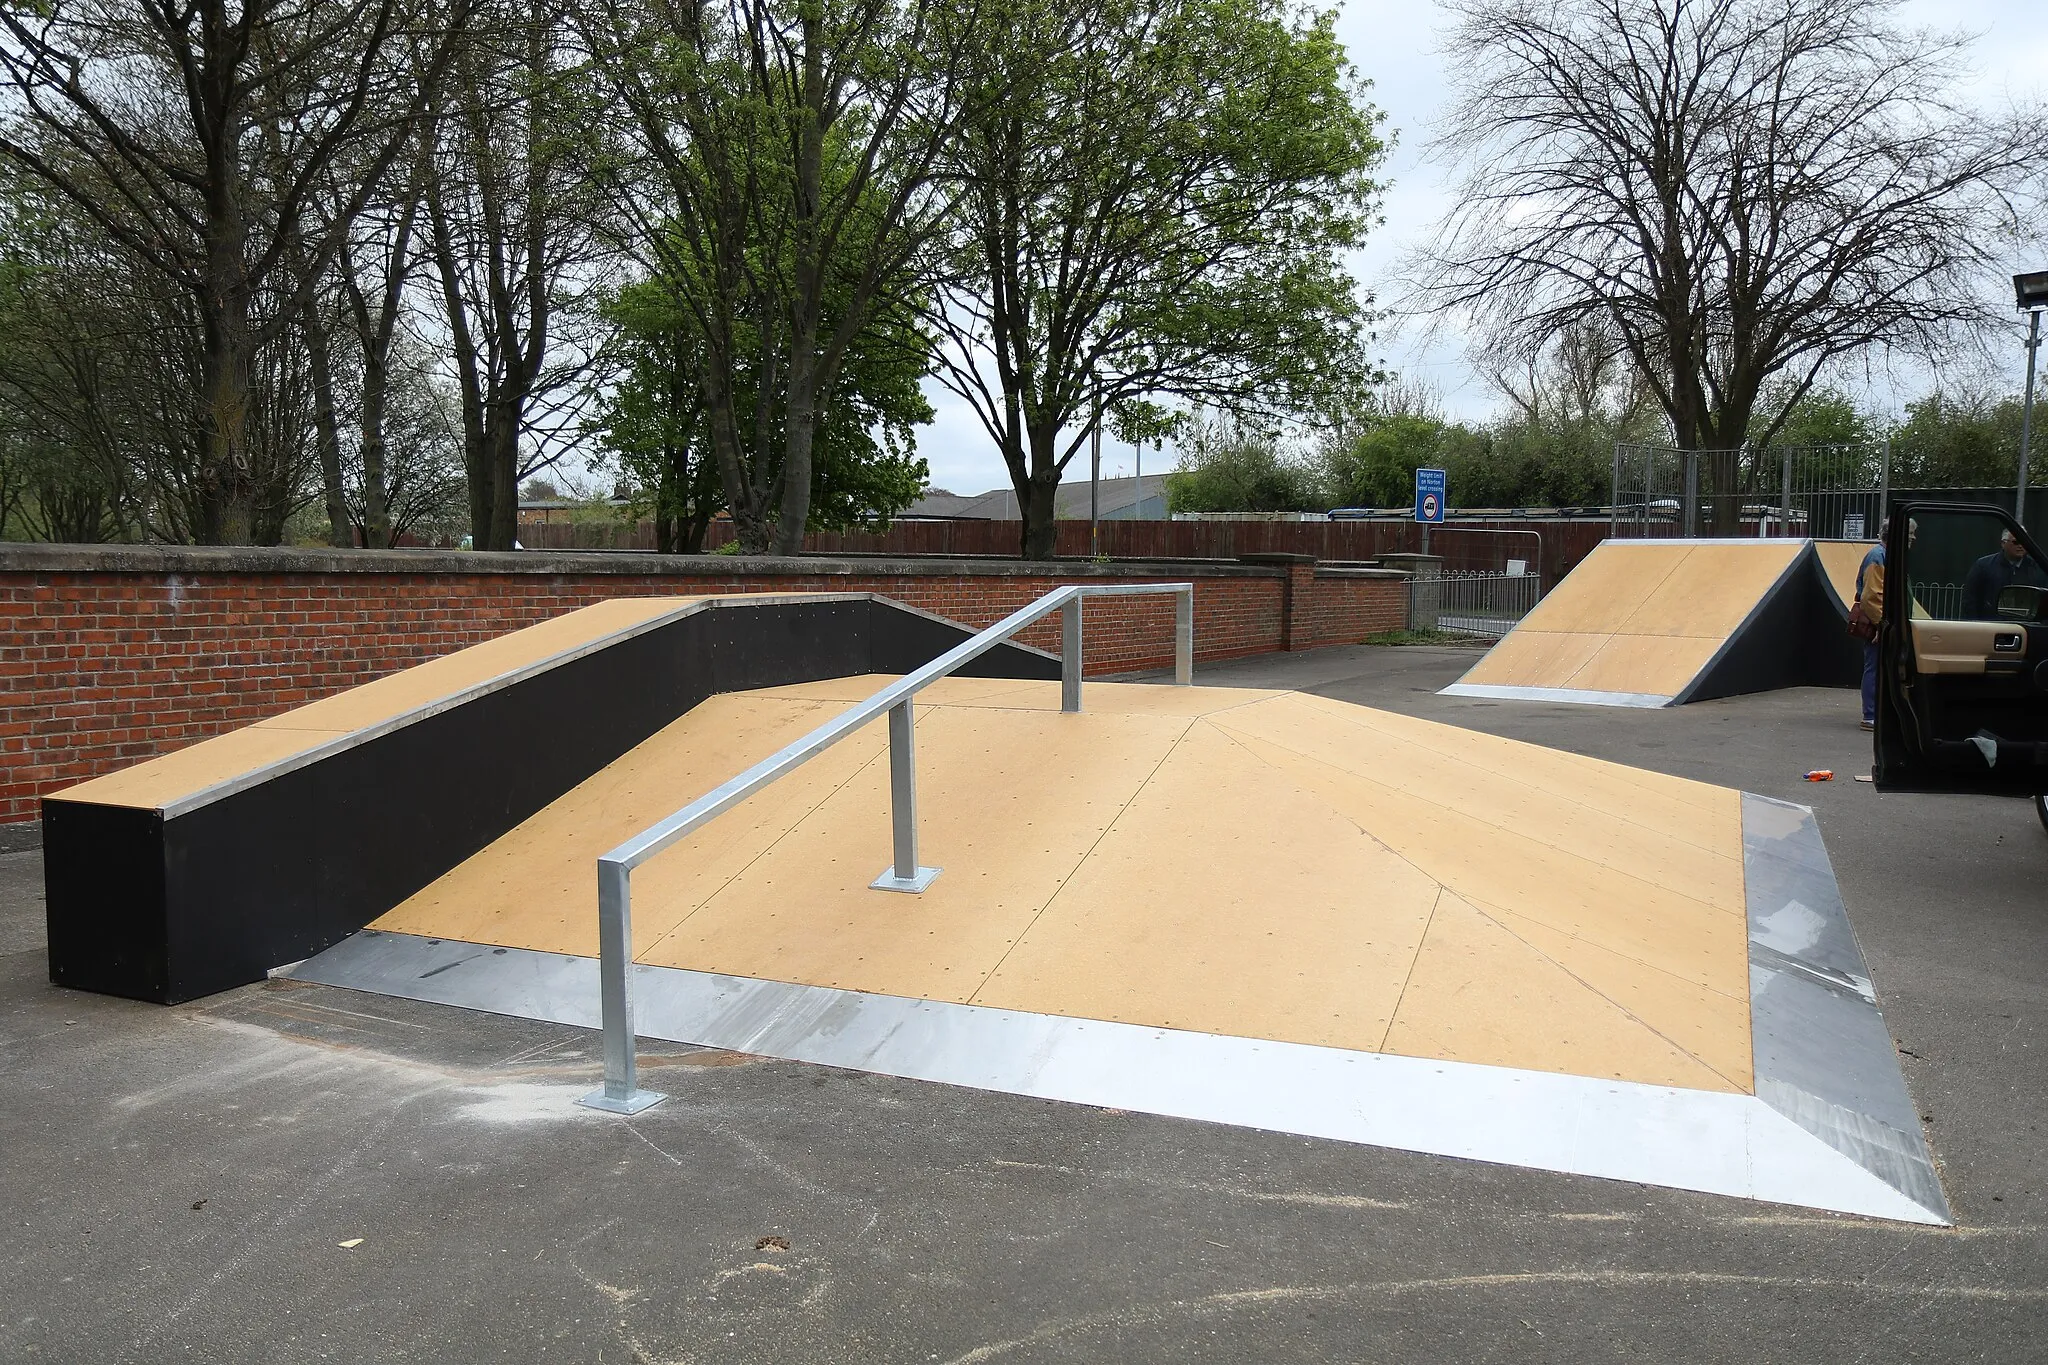 Photo showing: The new Pyramidal Funbox at Norton & Malton Skatepark built by King Ramps and Ryan Swain in 2022